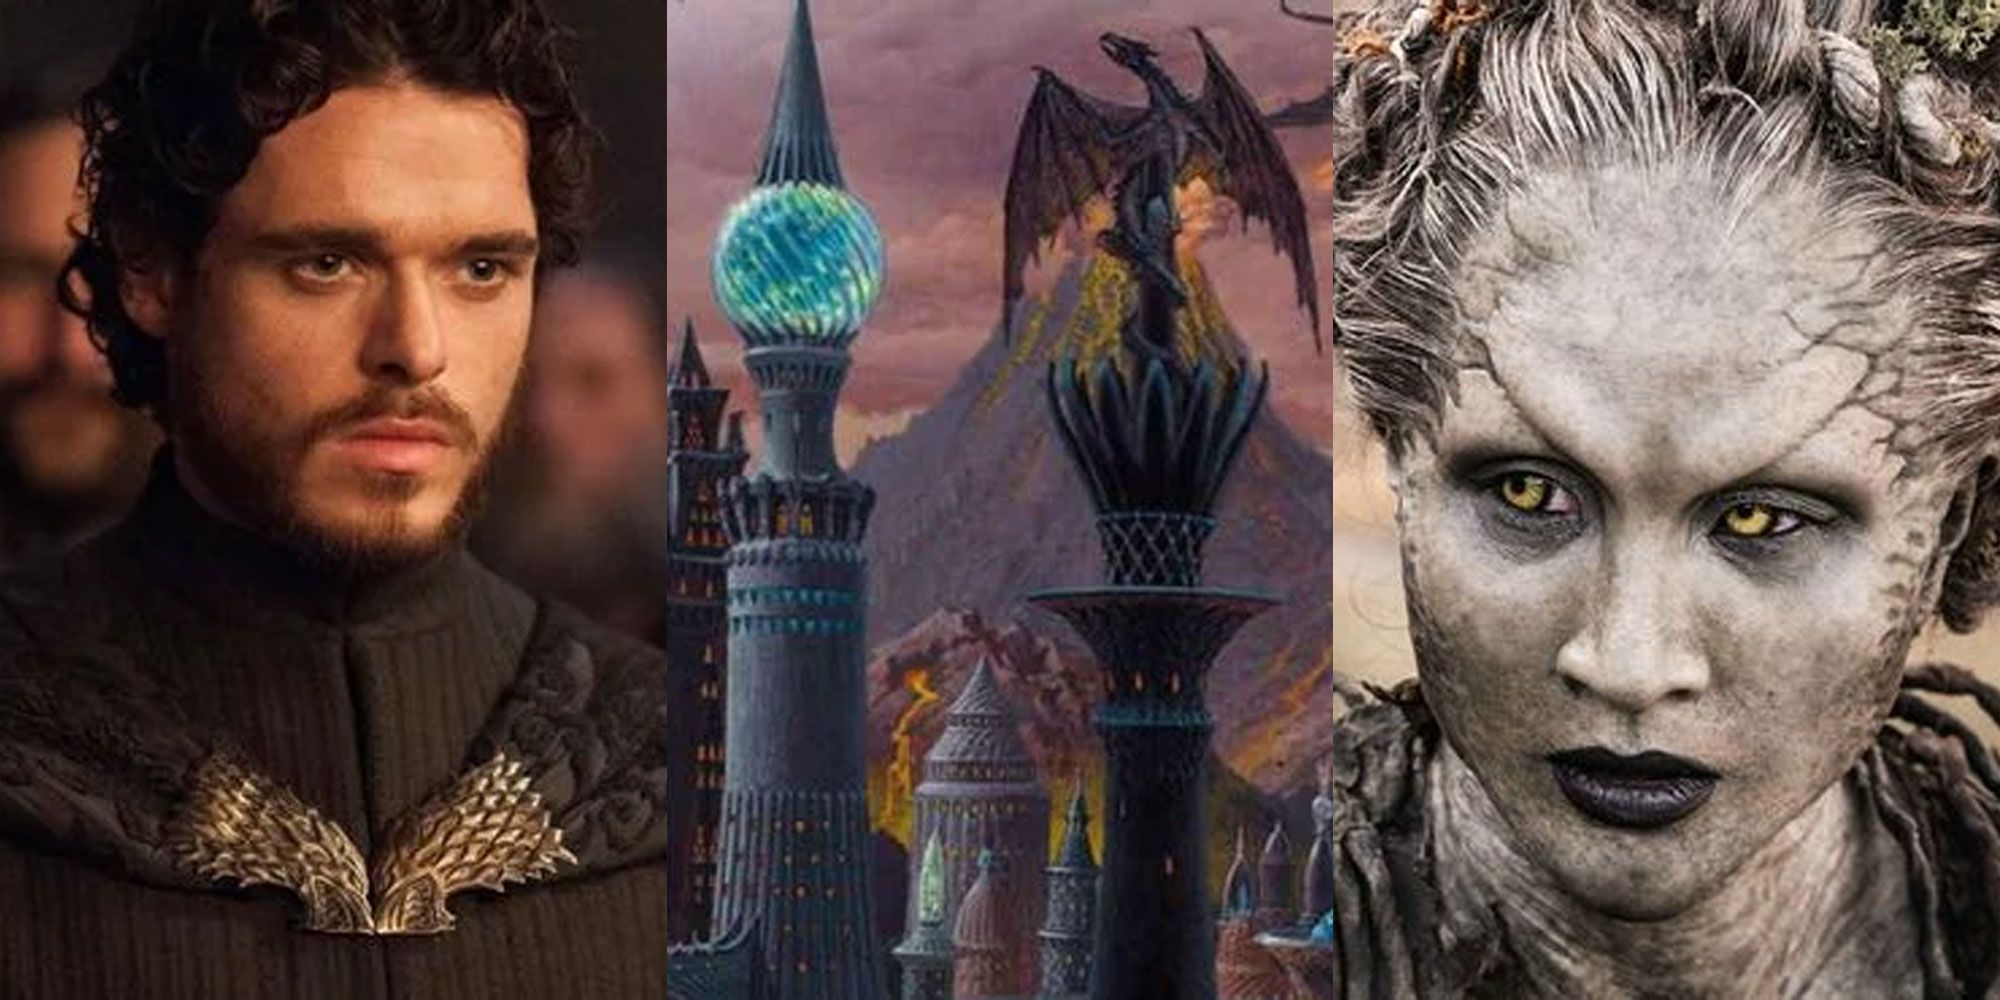 Split image of Game of Thrones TV characters around an illustration of a dragon on a tower